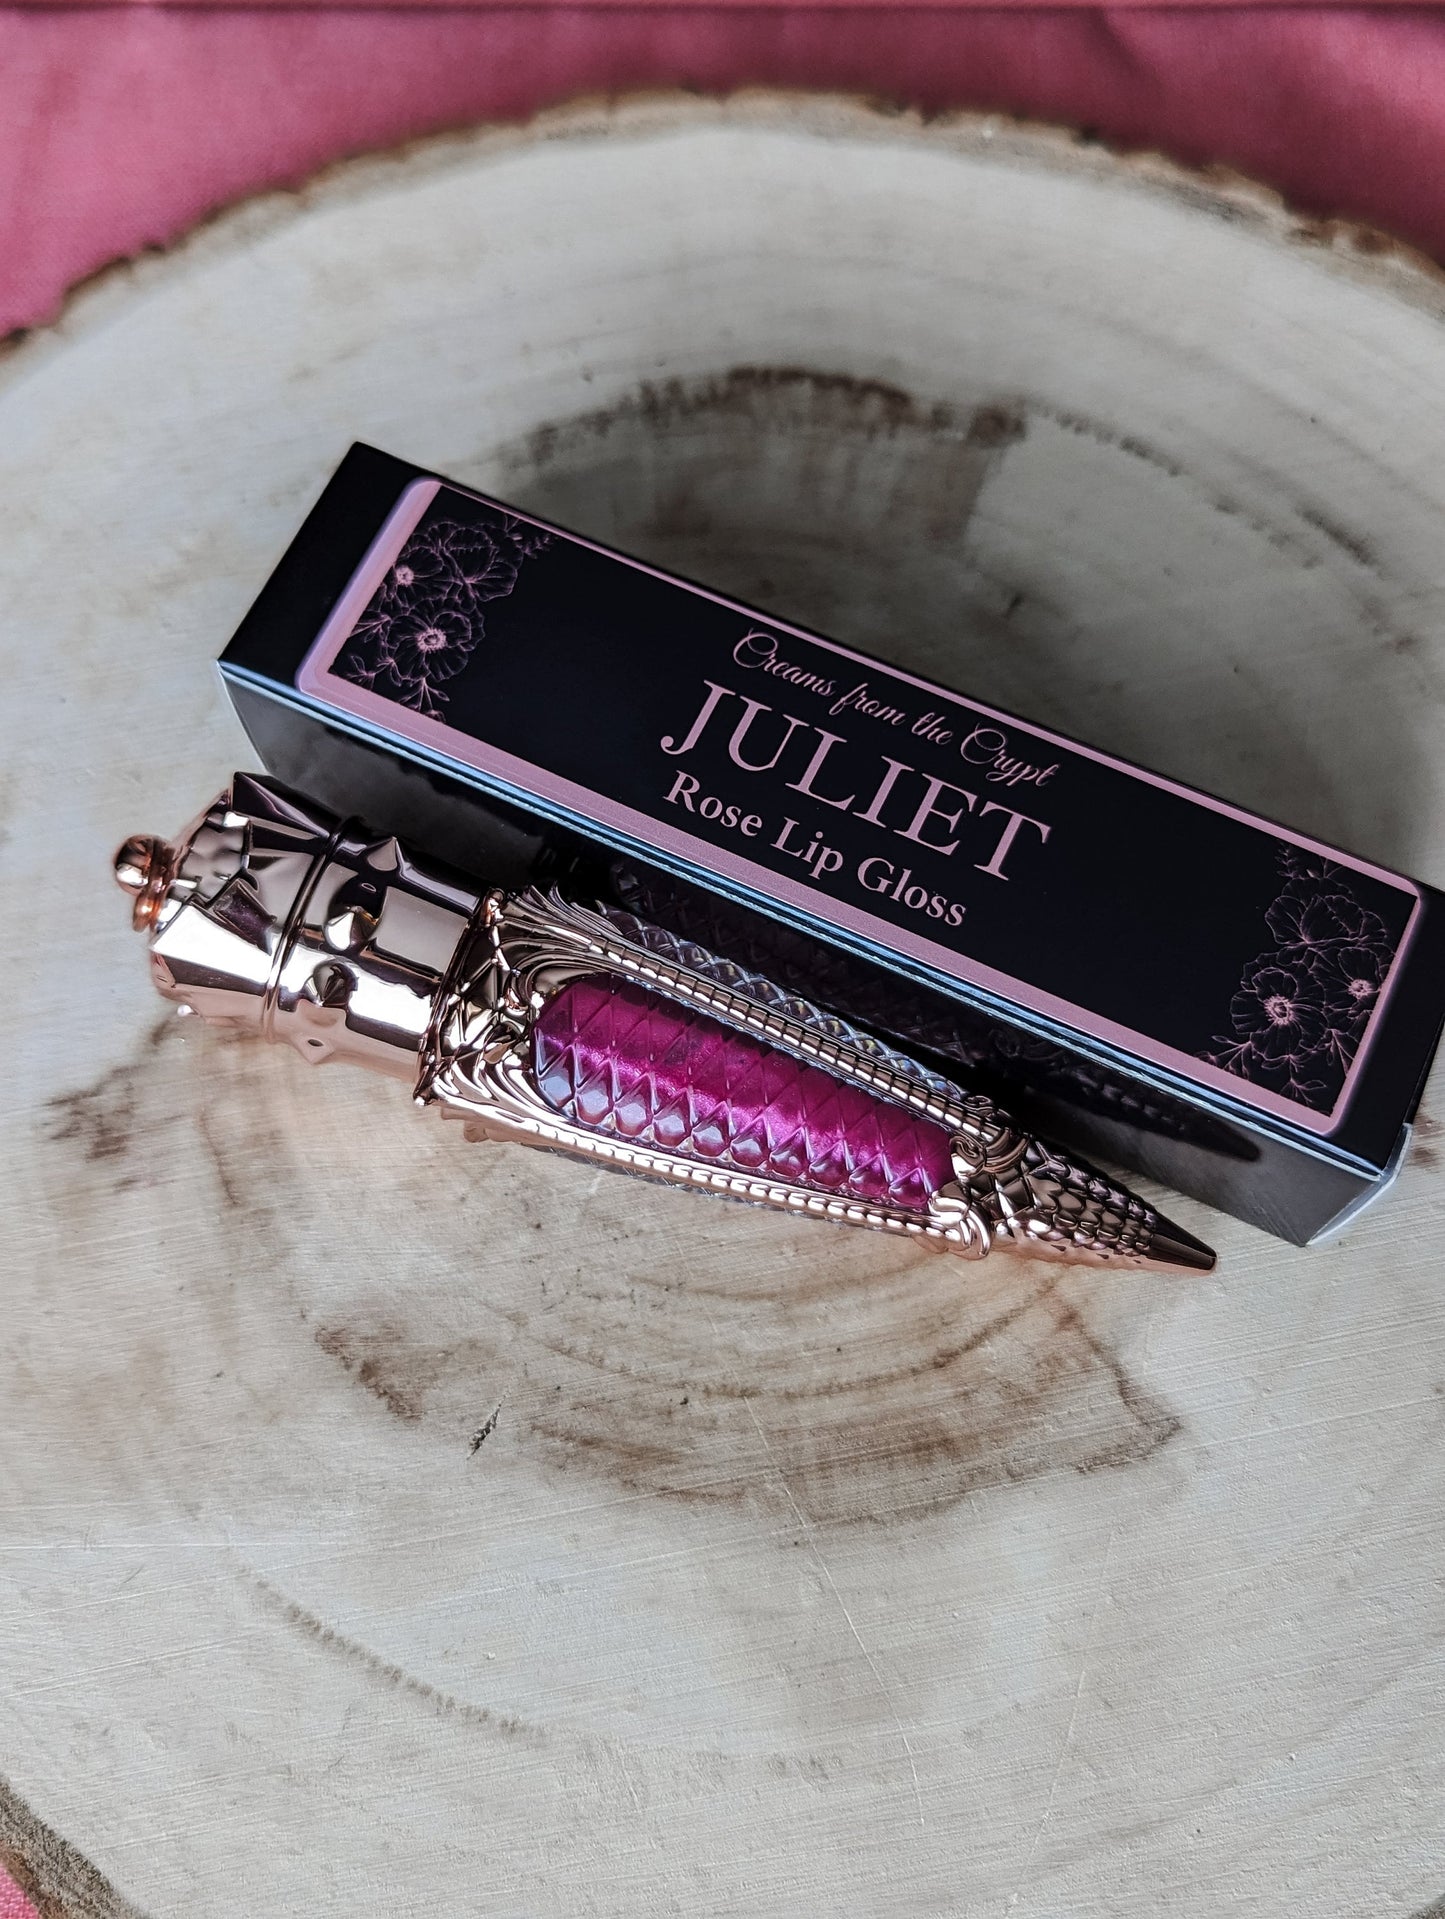 JULIET - Rose scented lip gloss, dark pink, sheer, lip topper, gothic cosmetics, vegan makeup, rose gold, Valentine's Day, witchy, gift